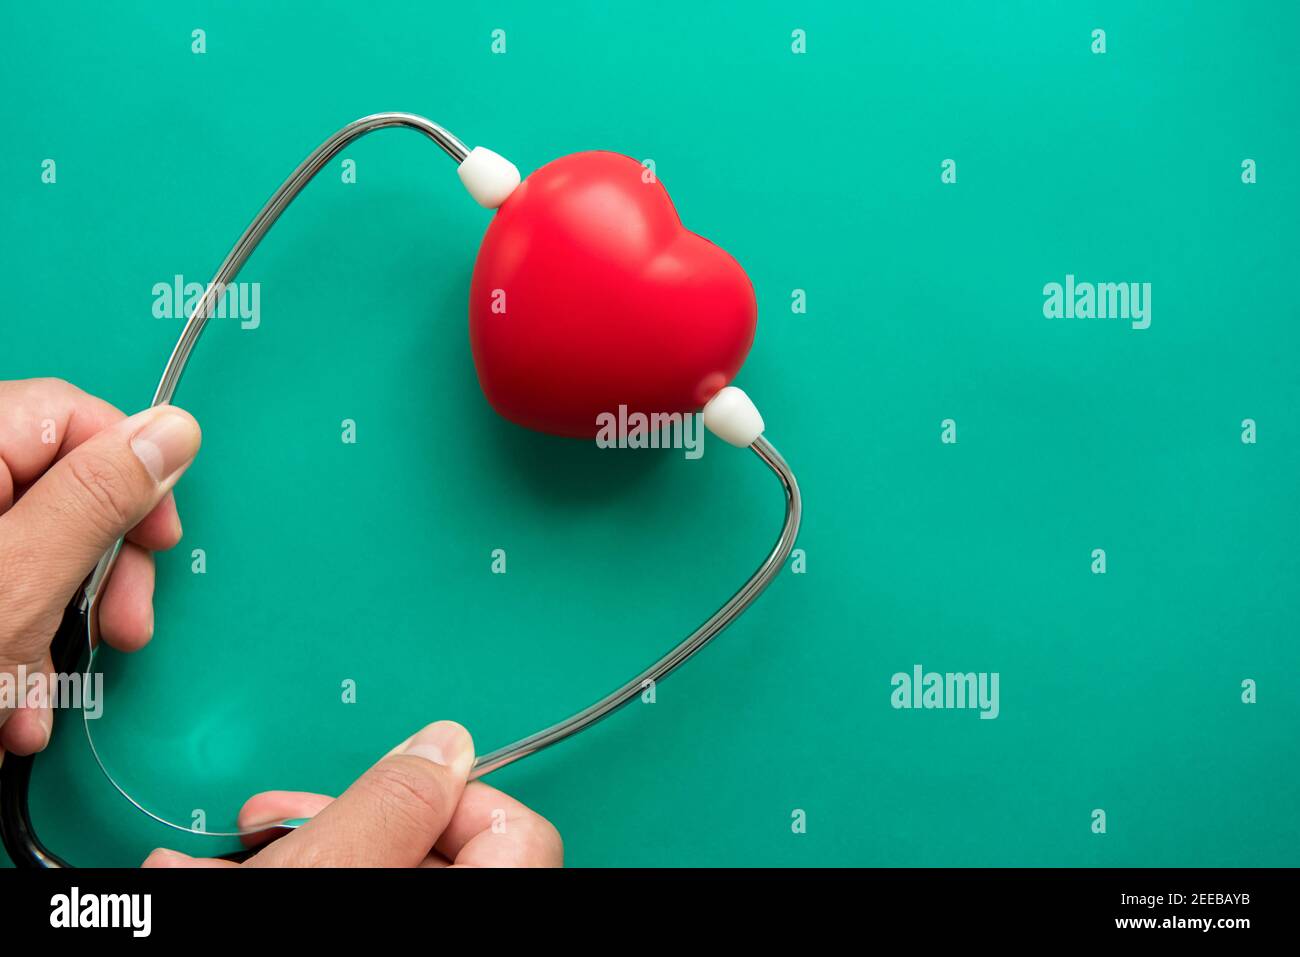 Red heart shape ball wearing stethoscope on green background, health care and medical concepts Stock Photo